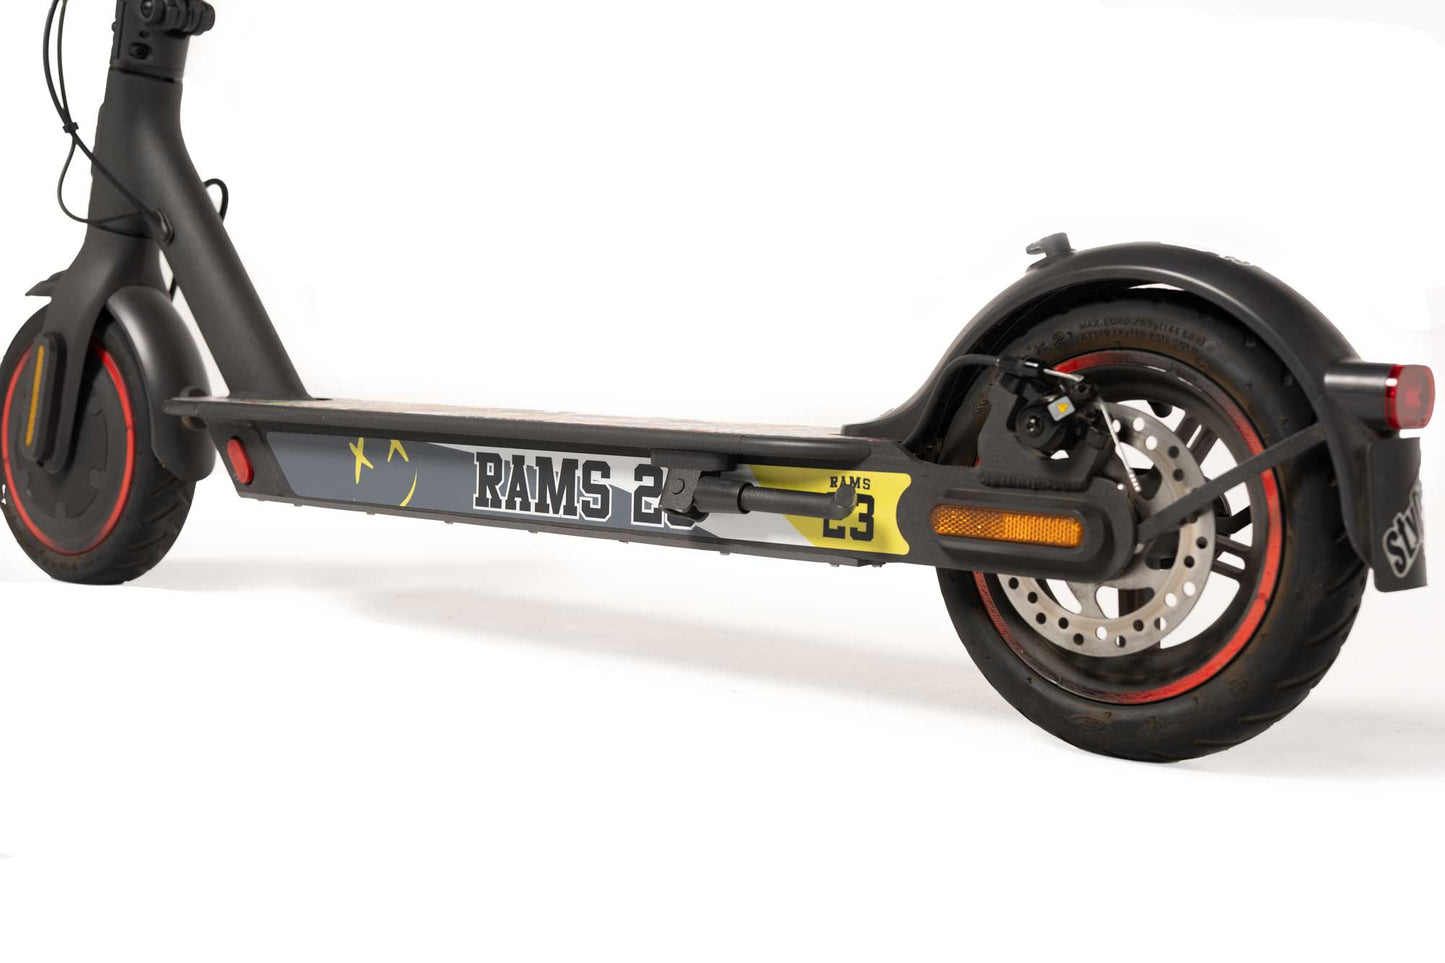 VINILO RAMS23 - YELLOW GRAY - Stylish Scooters